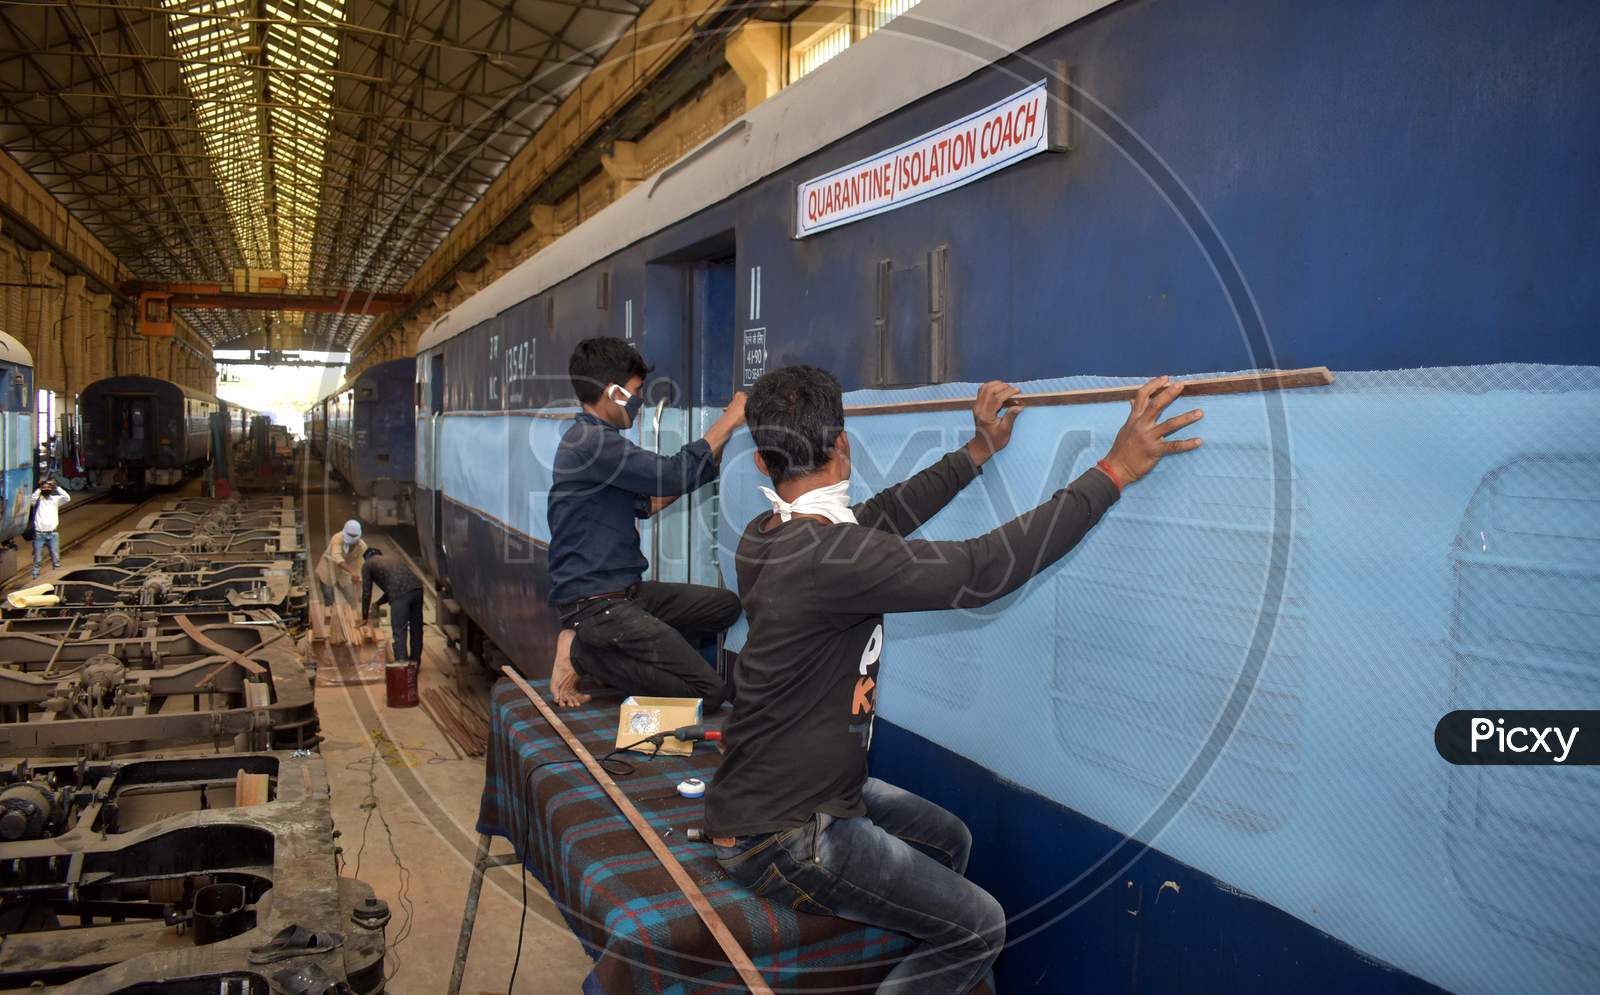 Railway Workers Getting The Train Bogies Ready For Isolation Wards For Corona Virus Or Covid-19 Patients, Prayagraj